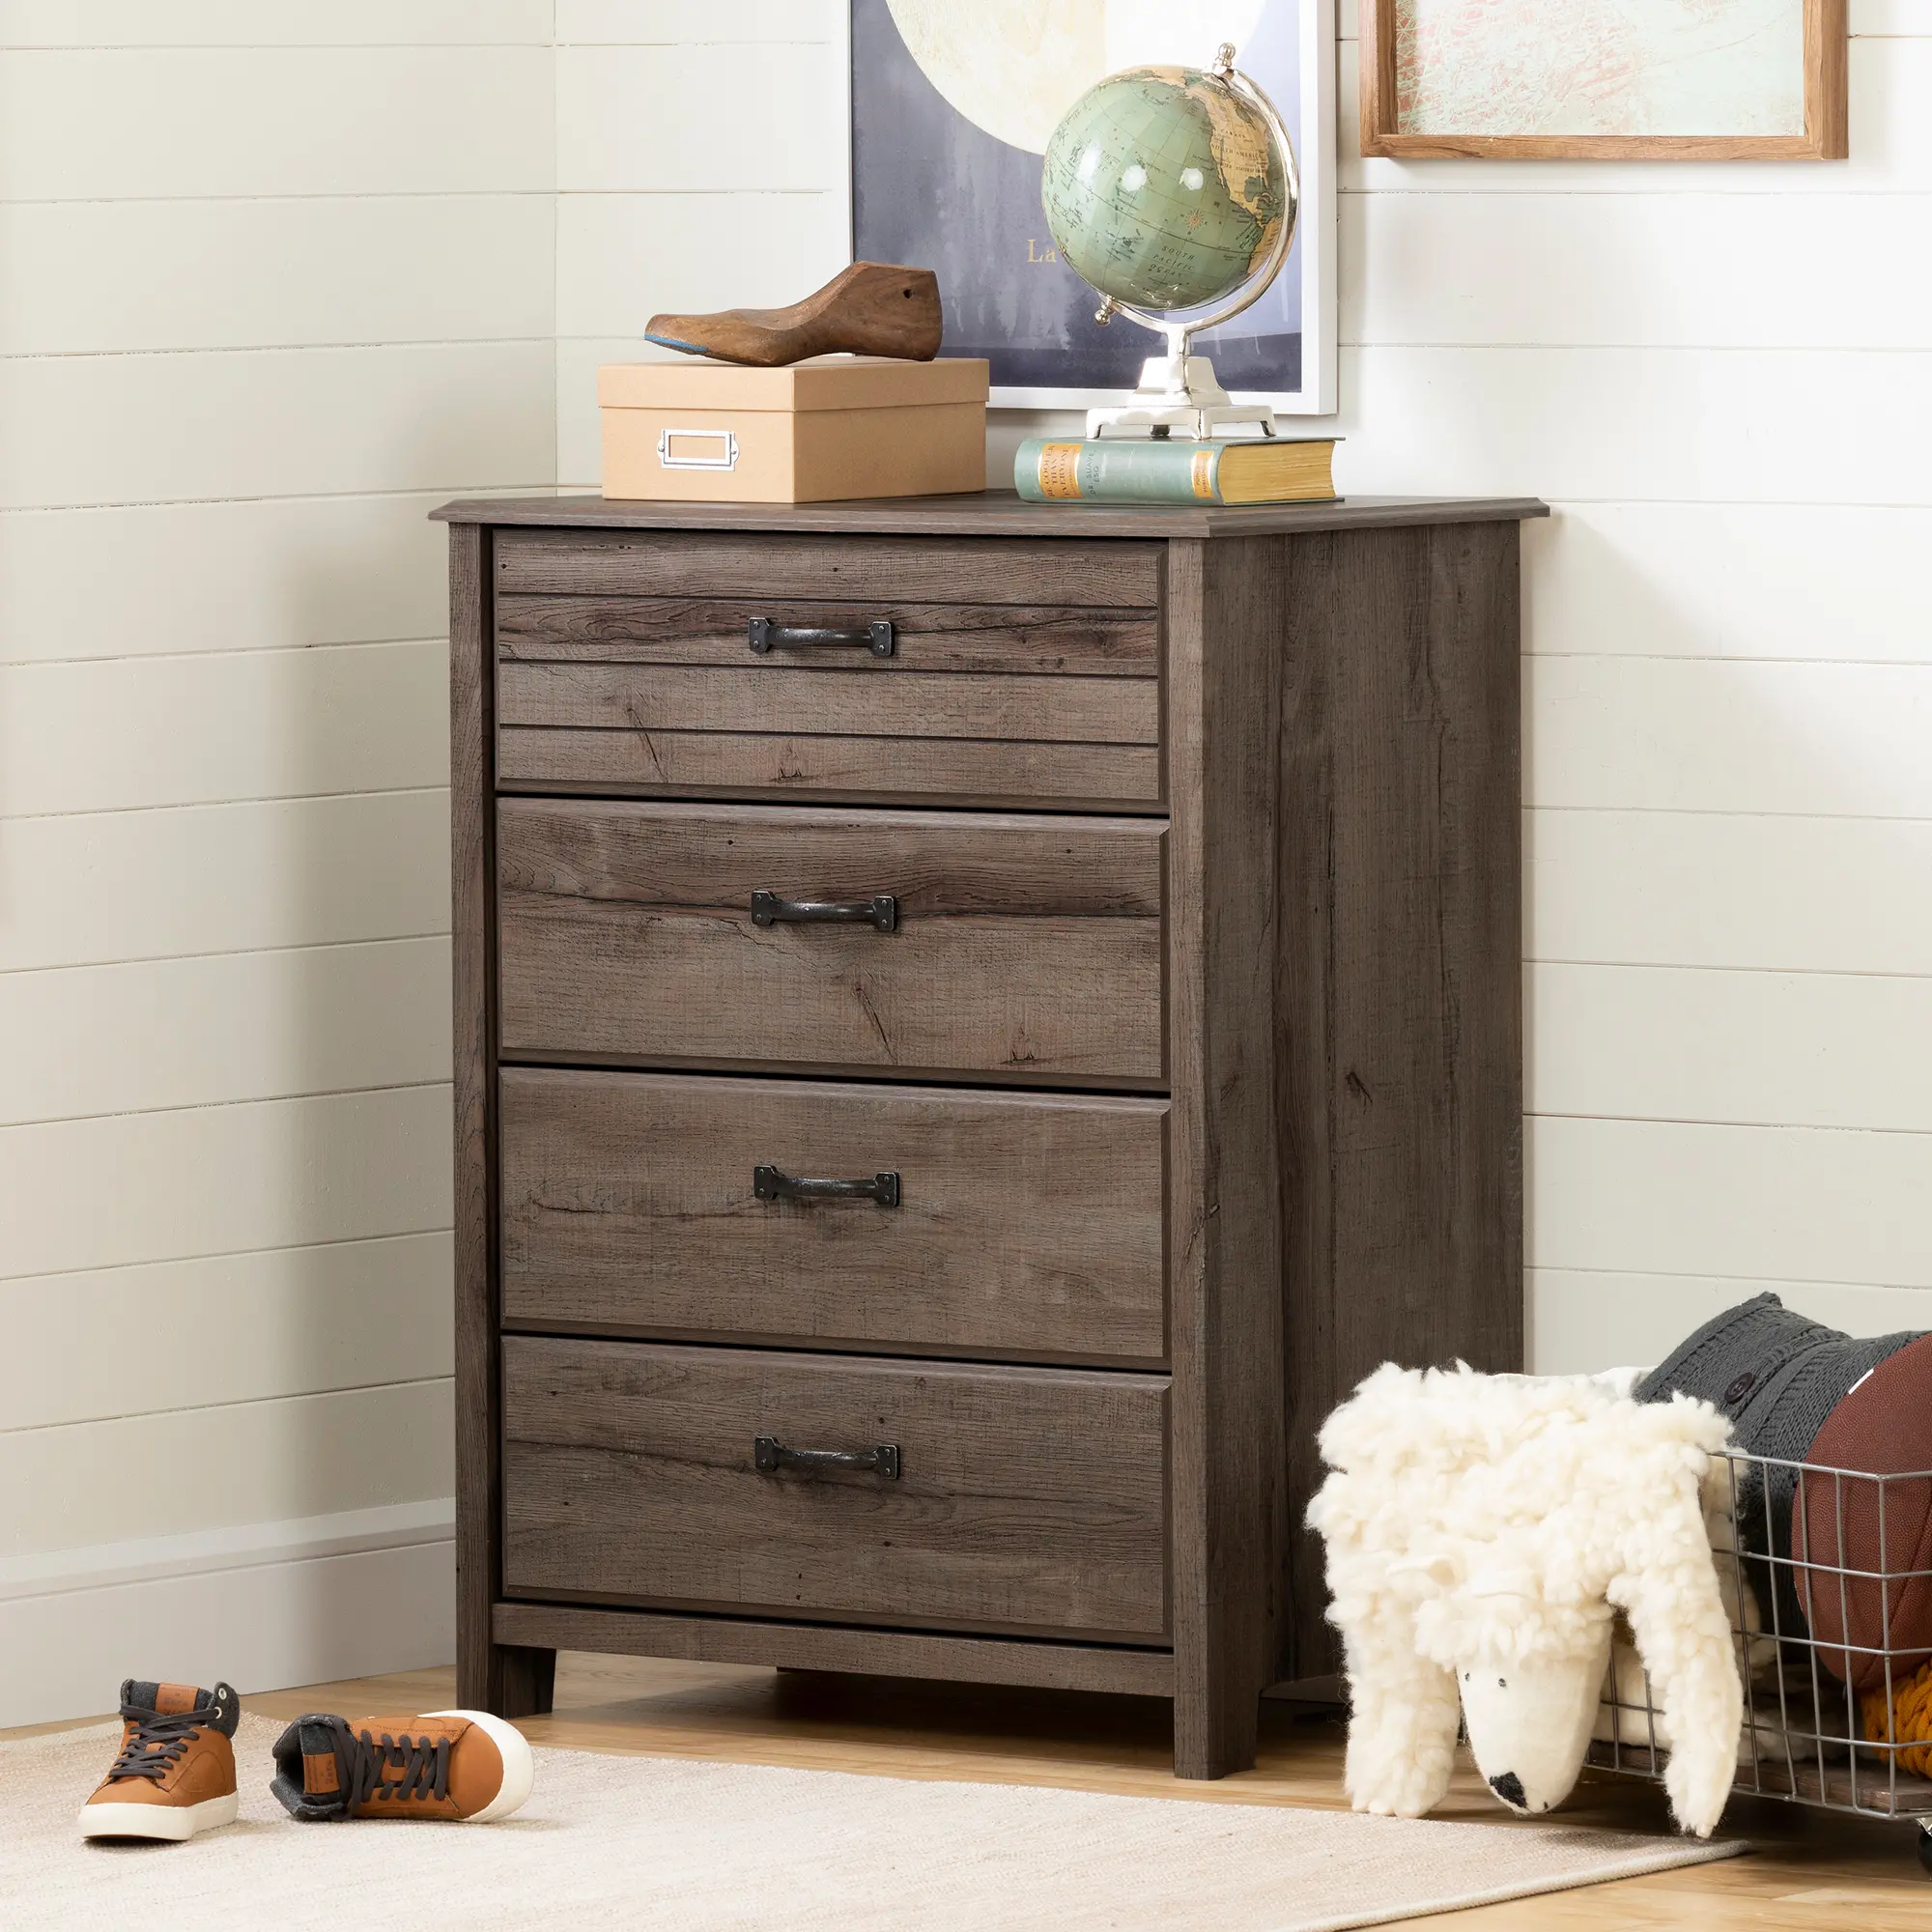 Asten Contemporary Fall Oak Chest of Drawers - South Shore